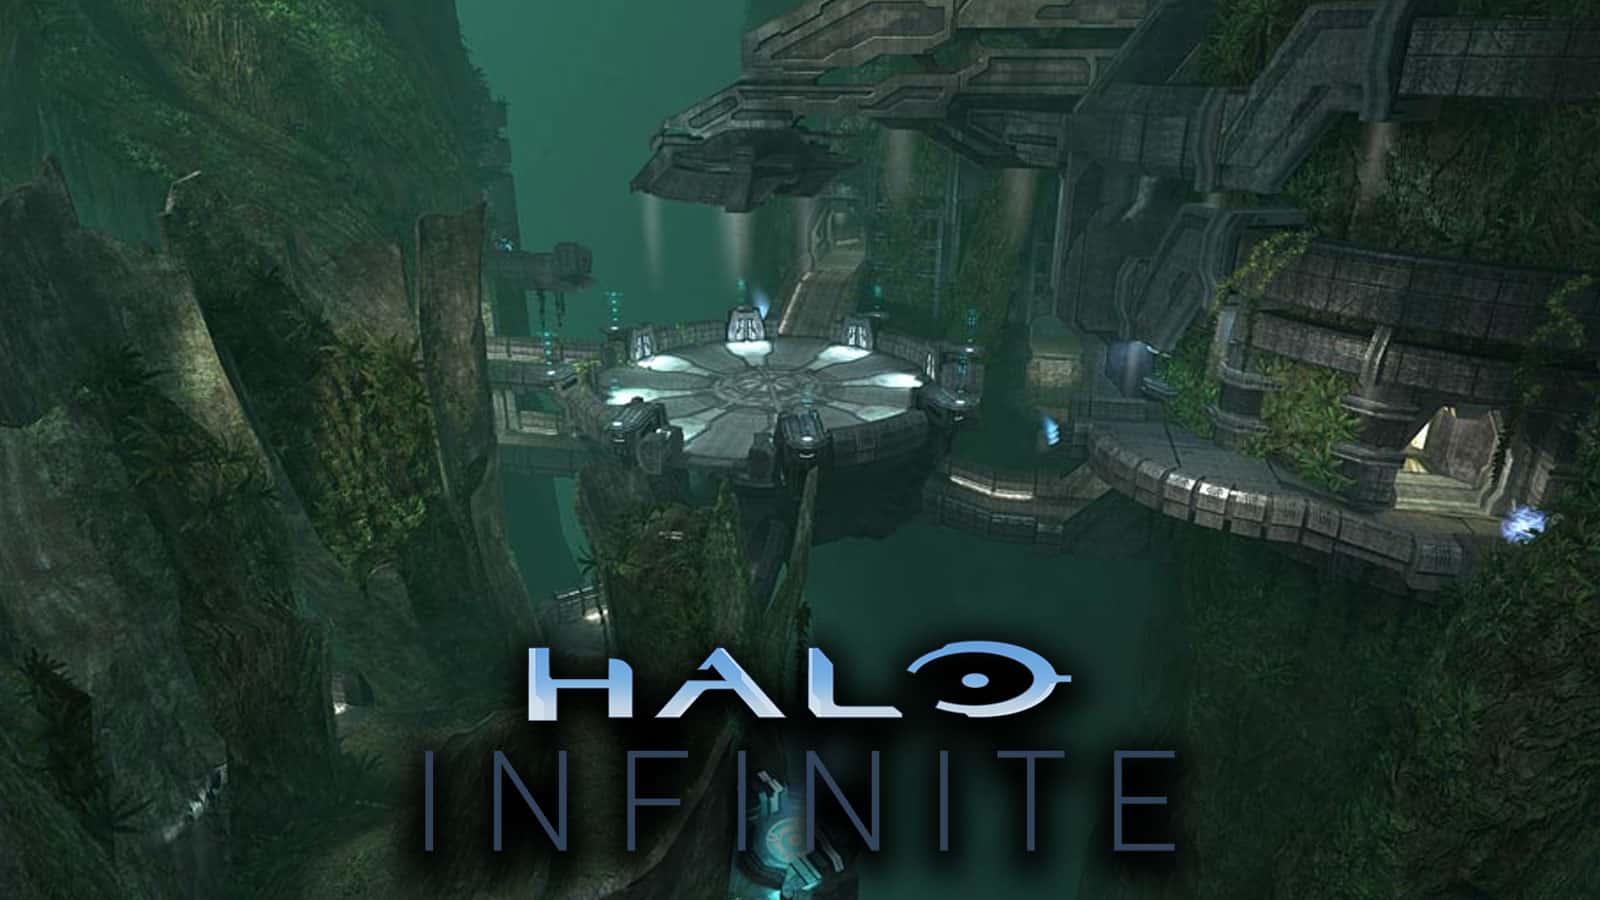 Halo map Guardian with Halo Infinite logo